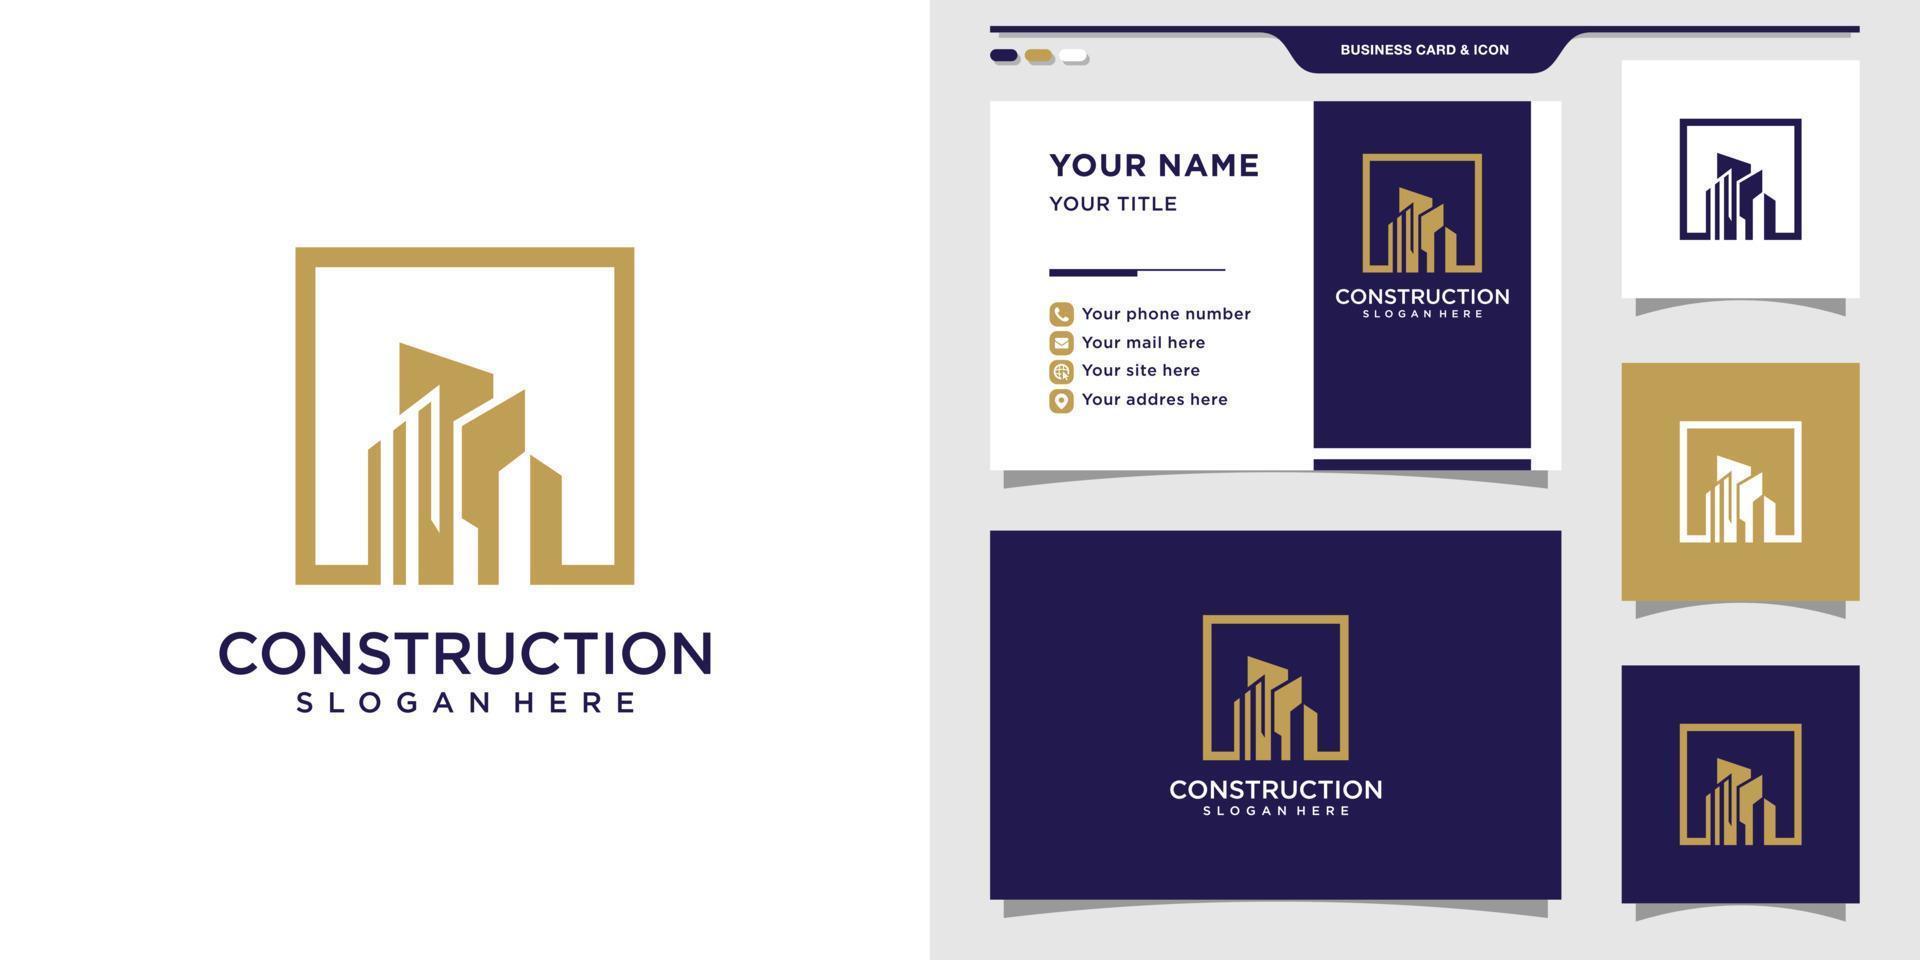 Construction logo with square concept and business card design Premium Vector